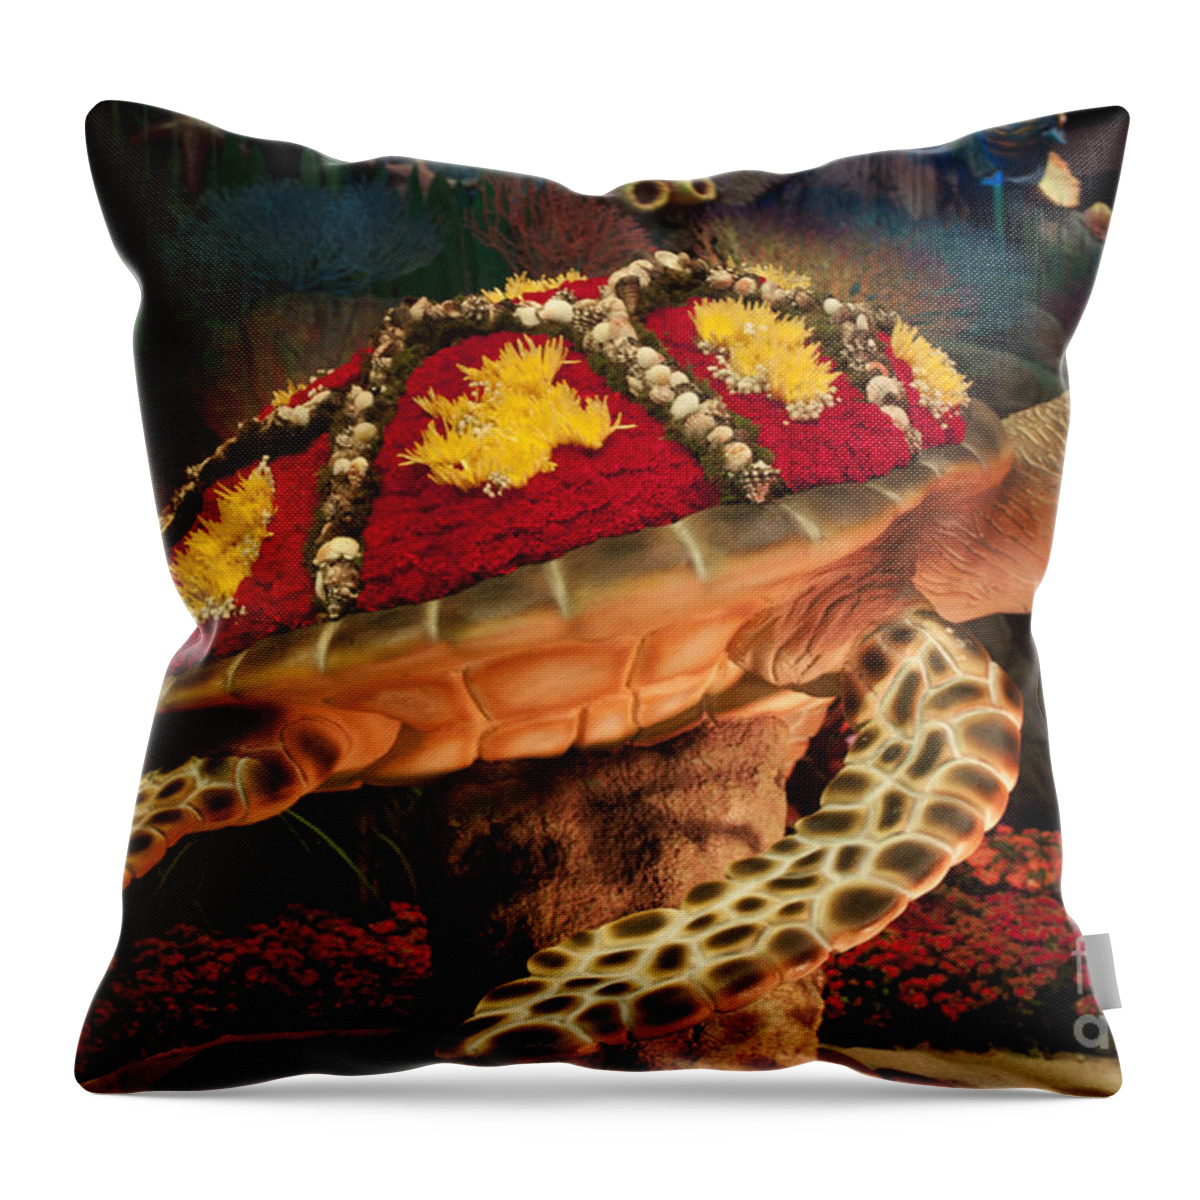 Beautiful Garden Throw Pillow featuring the photograph Tortoise with Flowers by Ivete Basso Photography